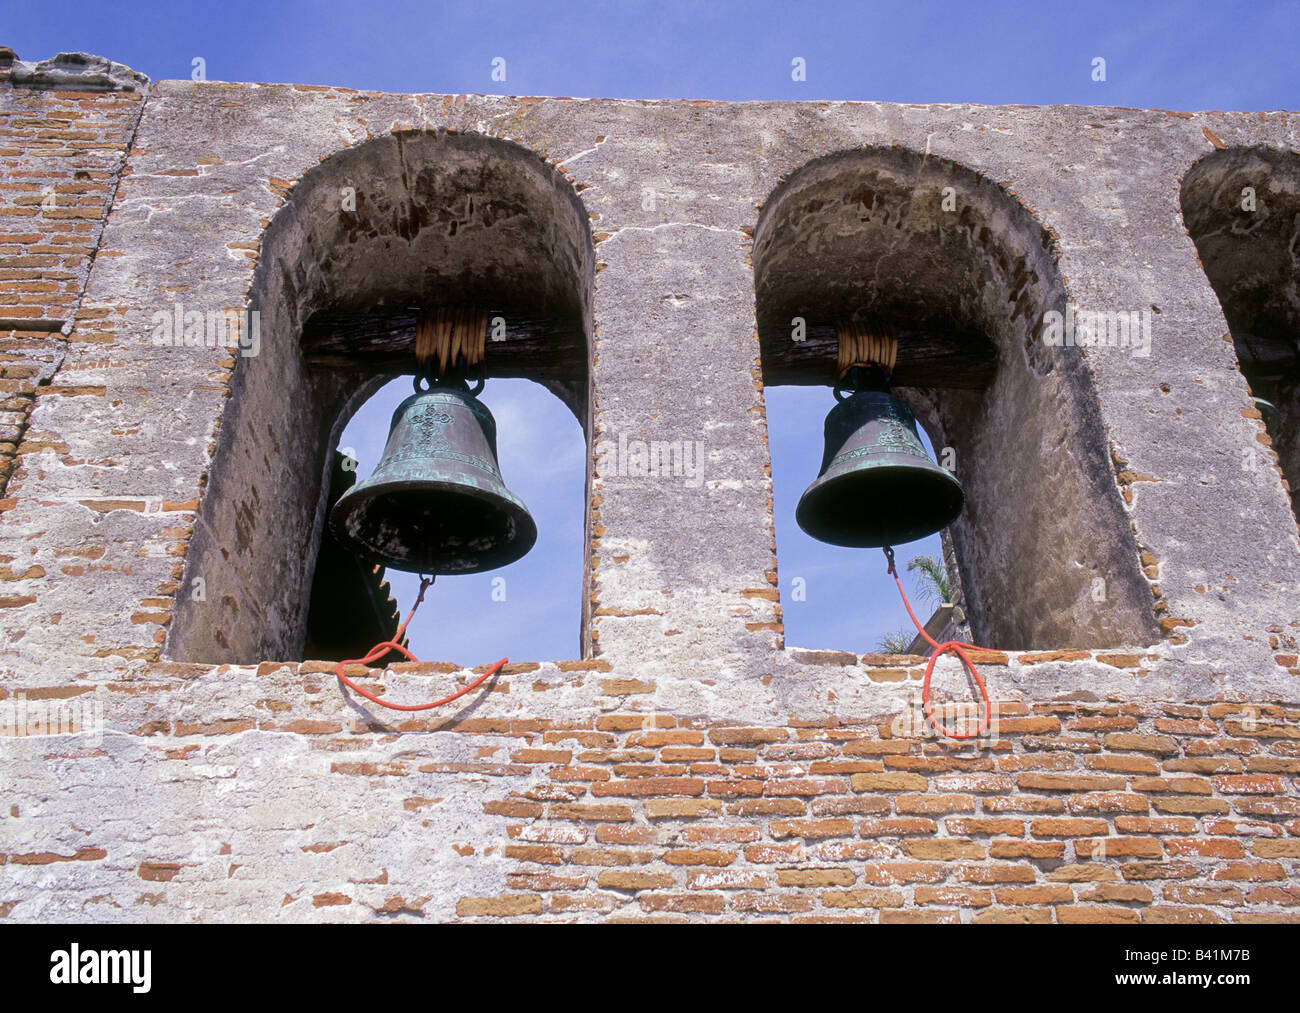 USA CALIFORNIA The old mission bells at the ancient Spanish mission of San Juan Capistrano Stock Photo